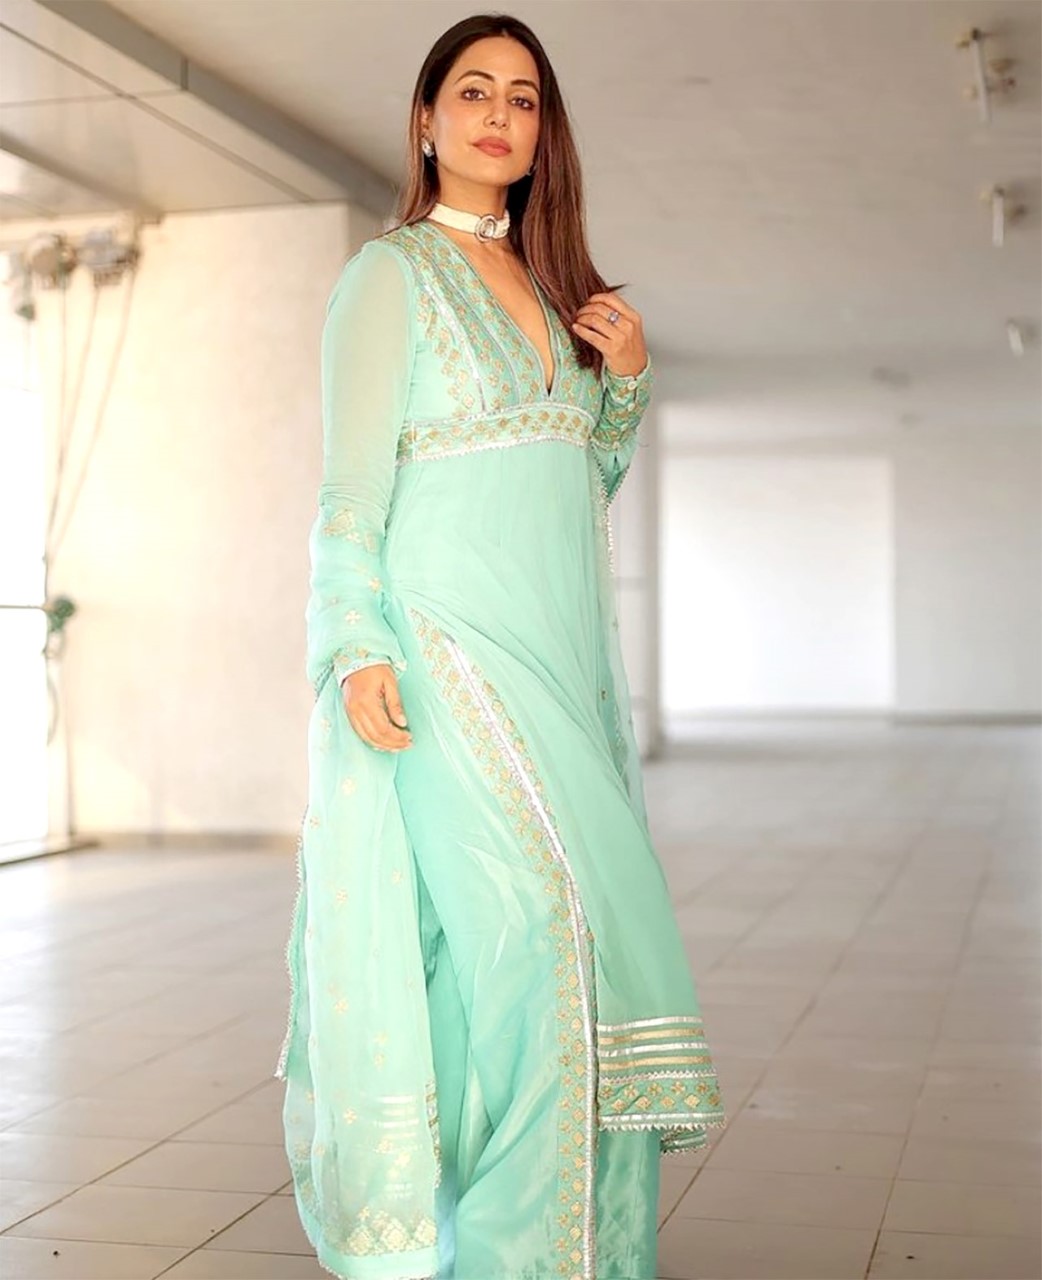 Hina Khan's ethereal charm shines through in this exquisite anarkali ensemble